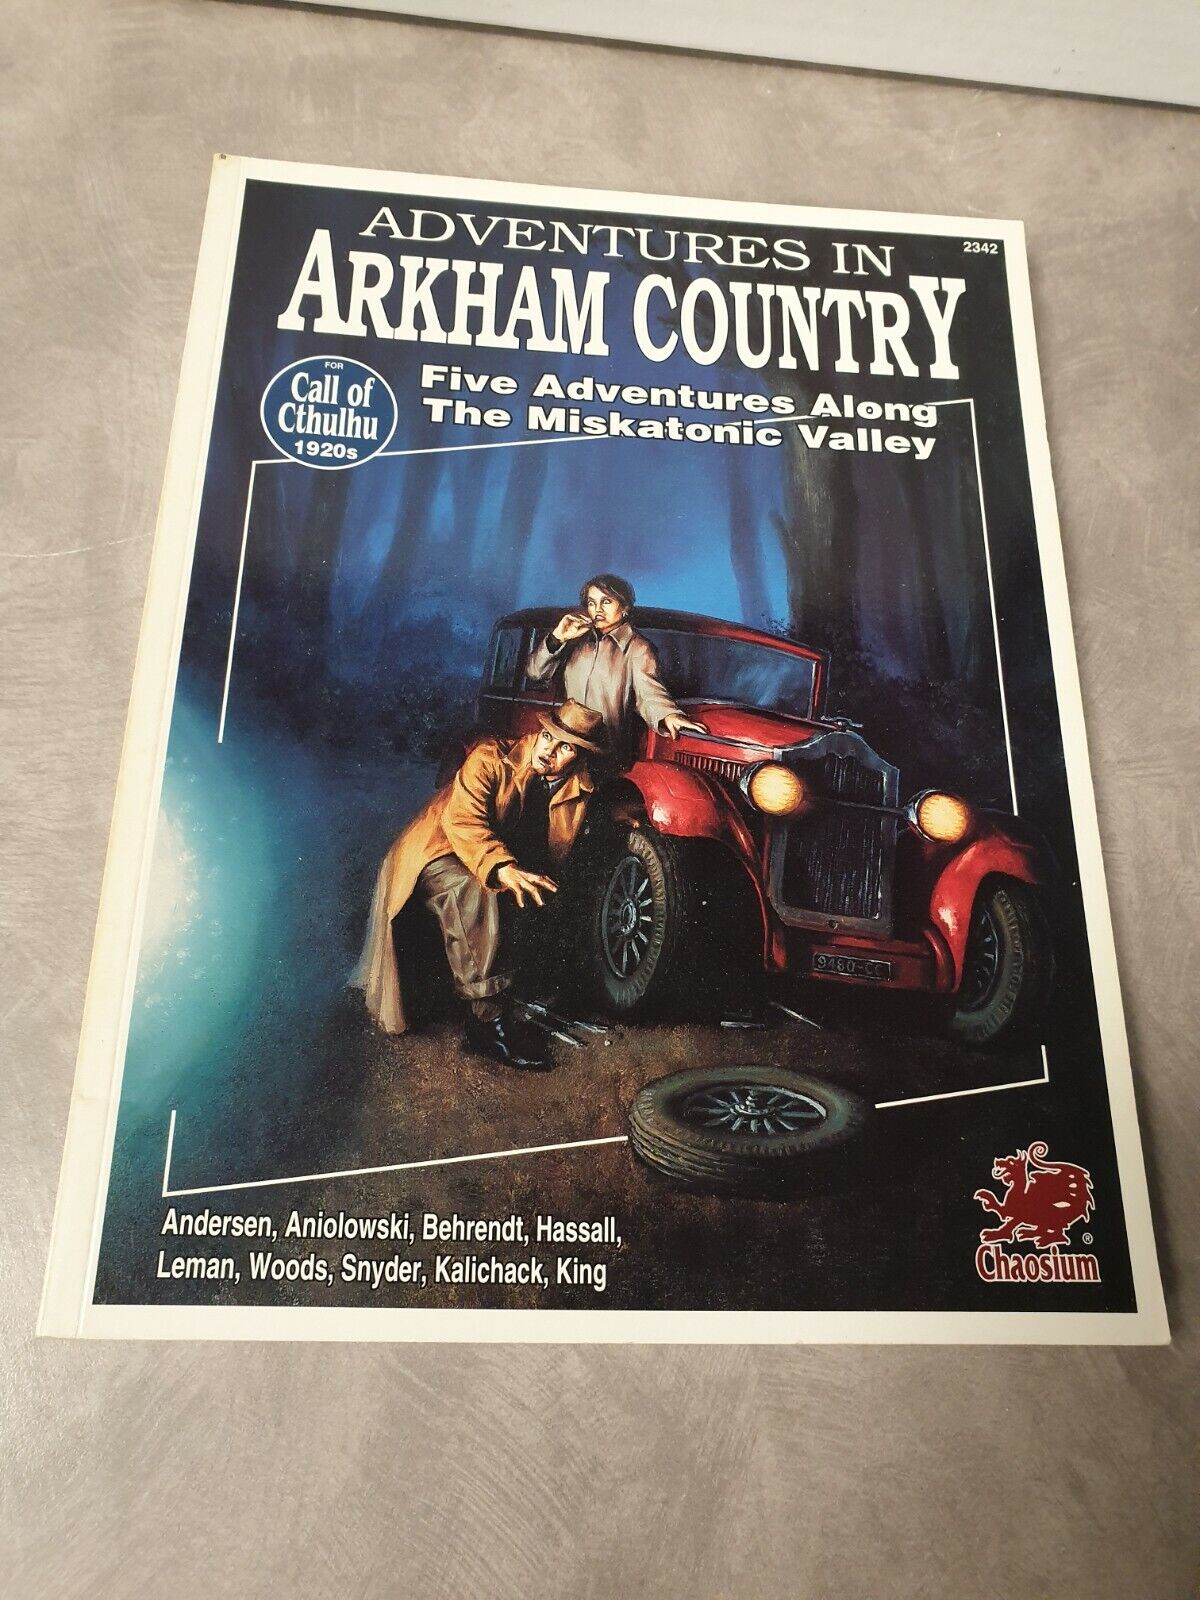 Chaosium - Call of Cthulhu Adventures of Arkham Country #2342